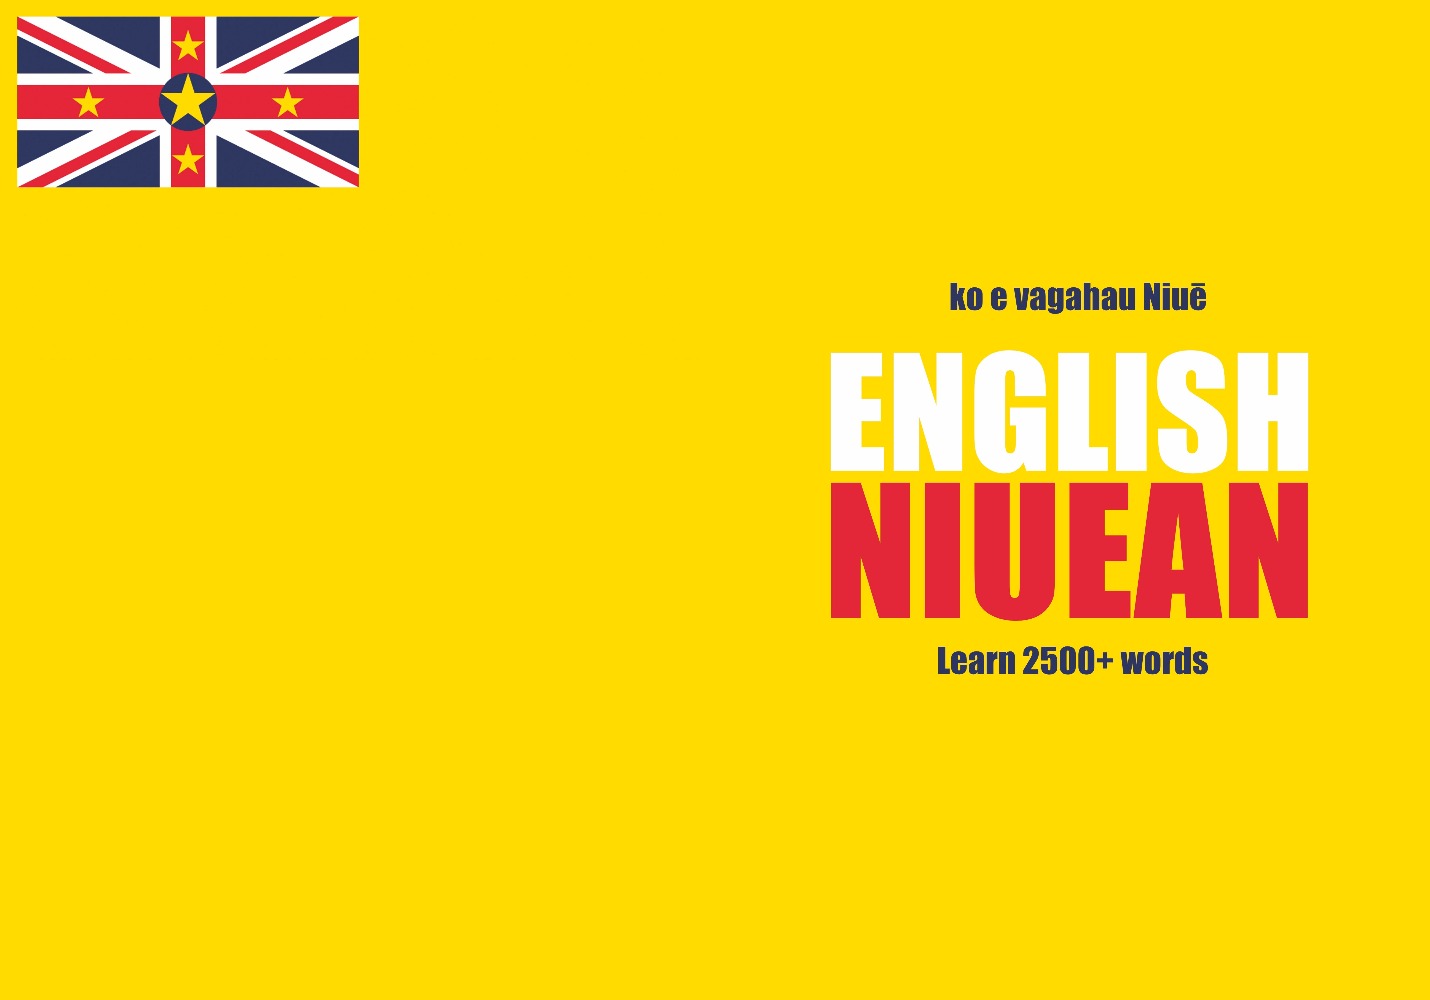 Niuean language learning notebook cover